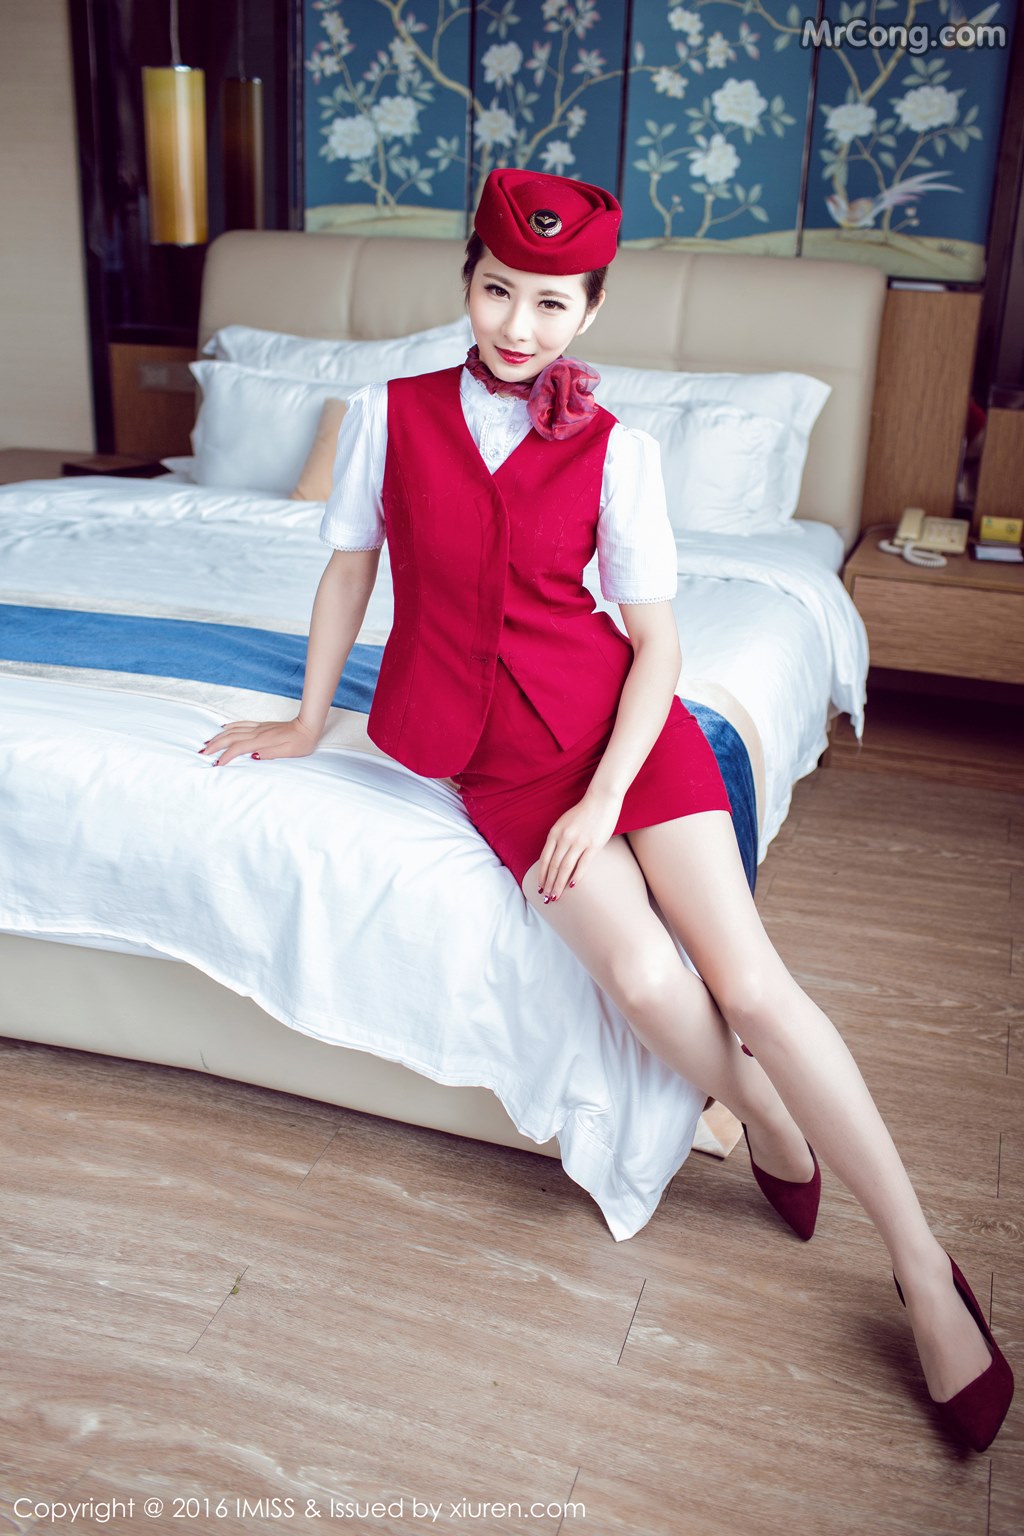 IMISS Vol.082: Lily Model (莉莉) (51 pictures)